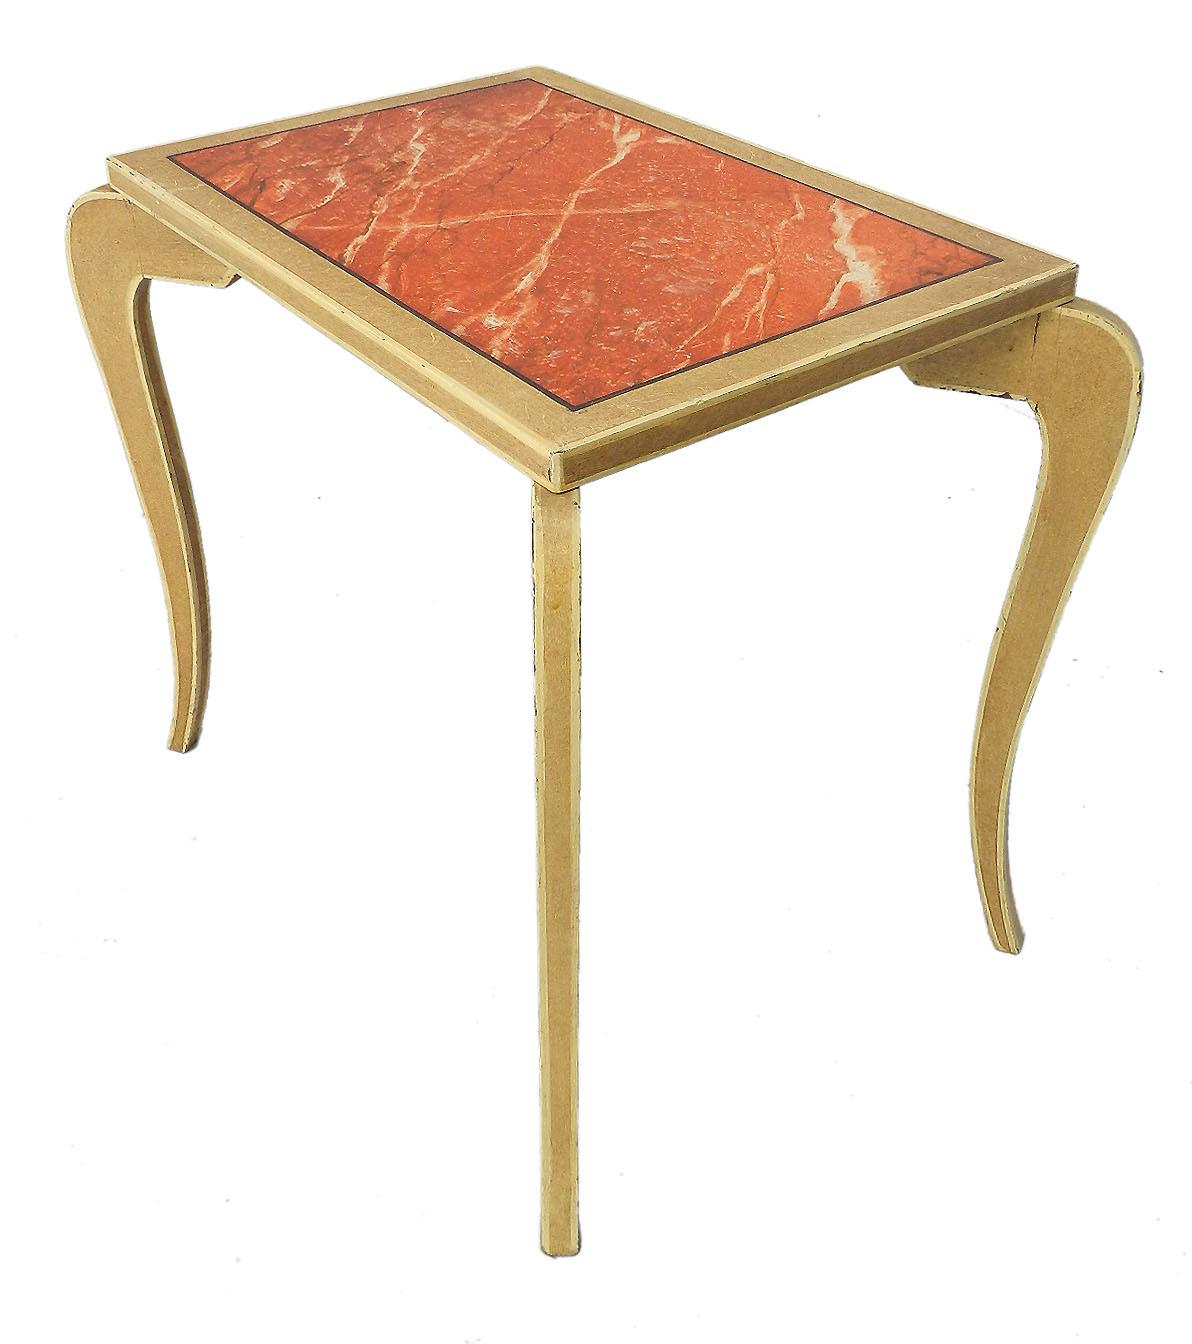 Wood French Side Table Original Trompe L' Oeil Painted Faux Marble, circa 1920